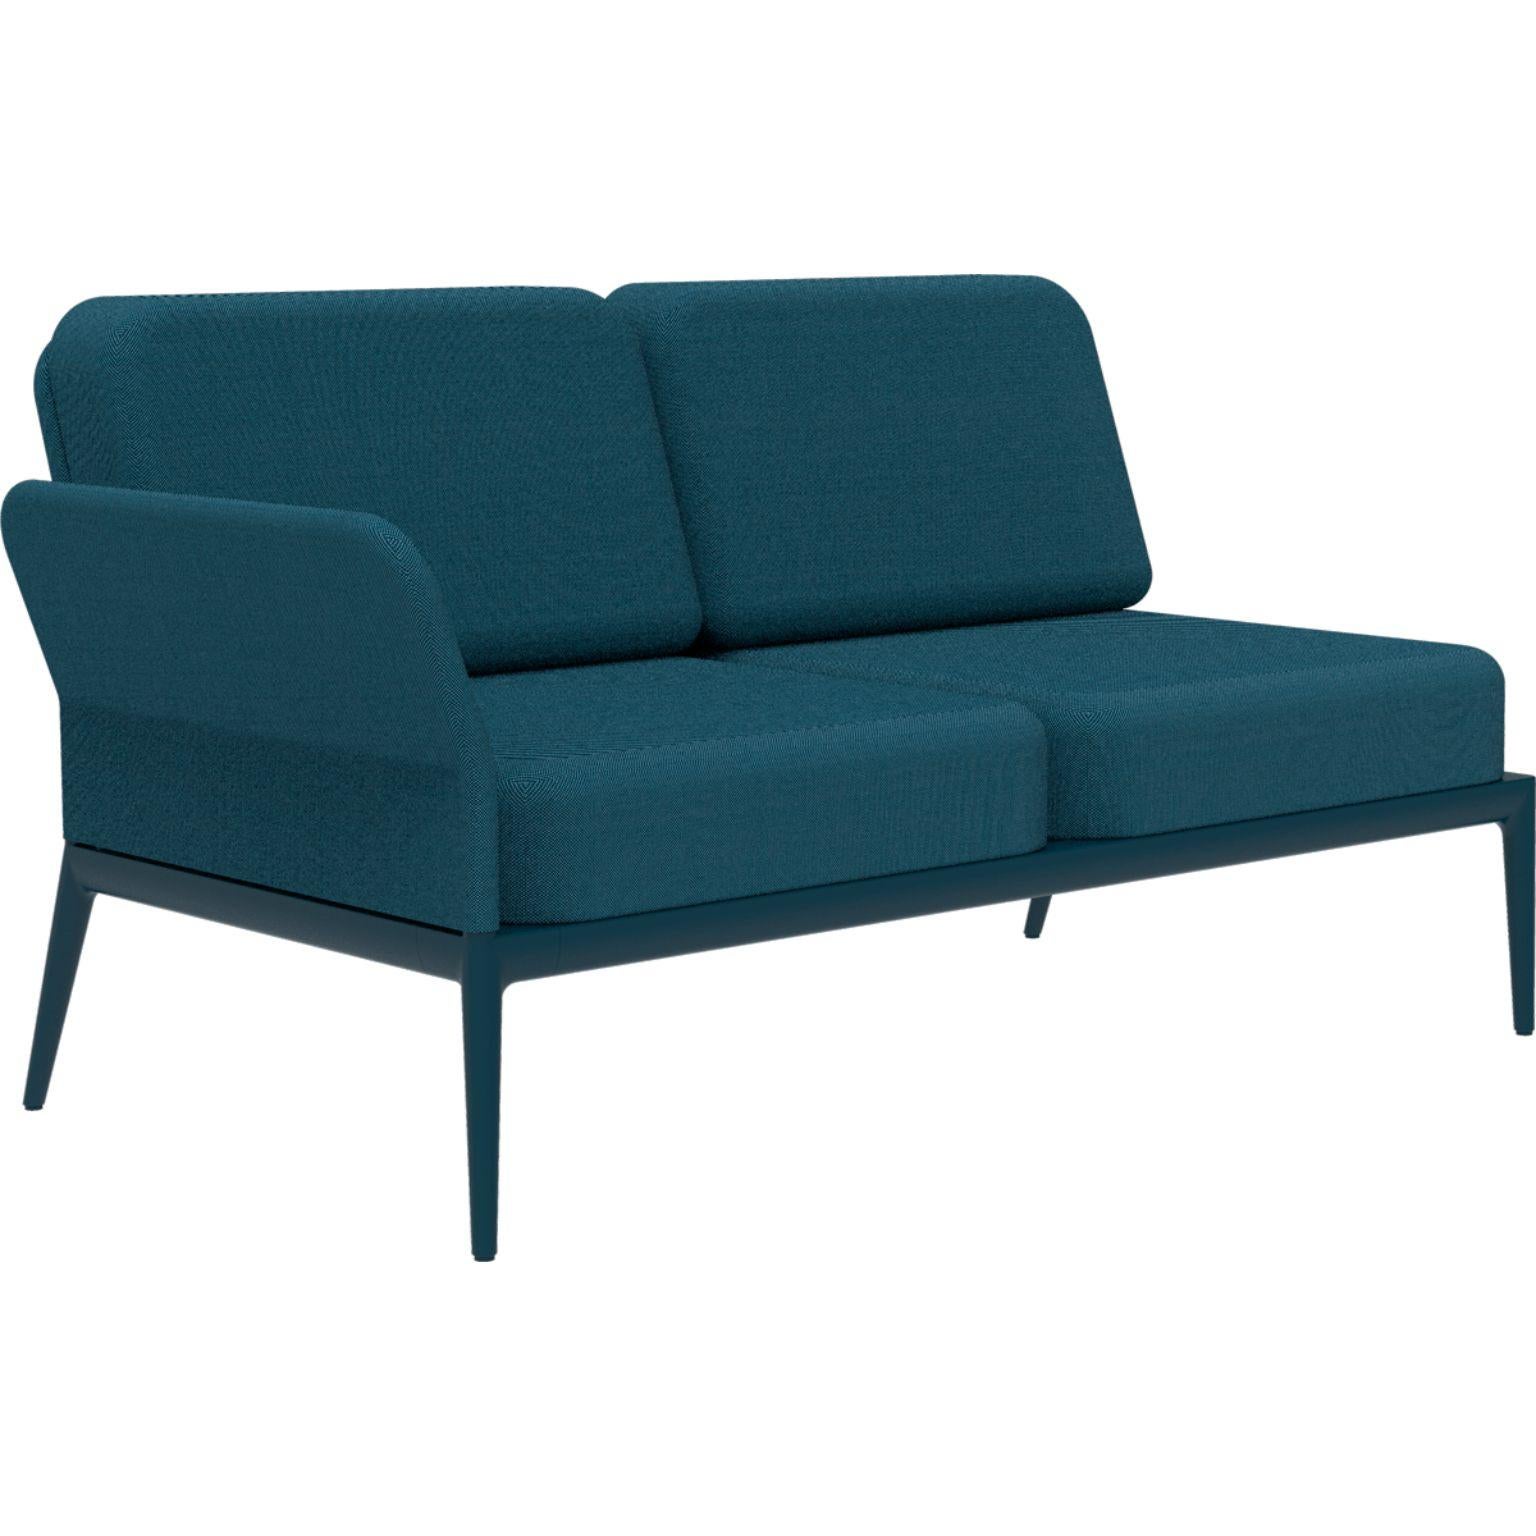 Cover Navy Double Right Modular Sofa by MOWEE
Dimensions: D83 x W148 x H81 cm (seat height 42 cm).
Material: Aluminum and upholstery.
Weight: 29 kg.
Also available in different colors and finishes. 

An unmistakable collection for its beauty